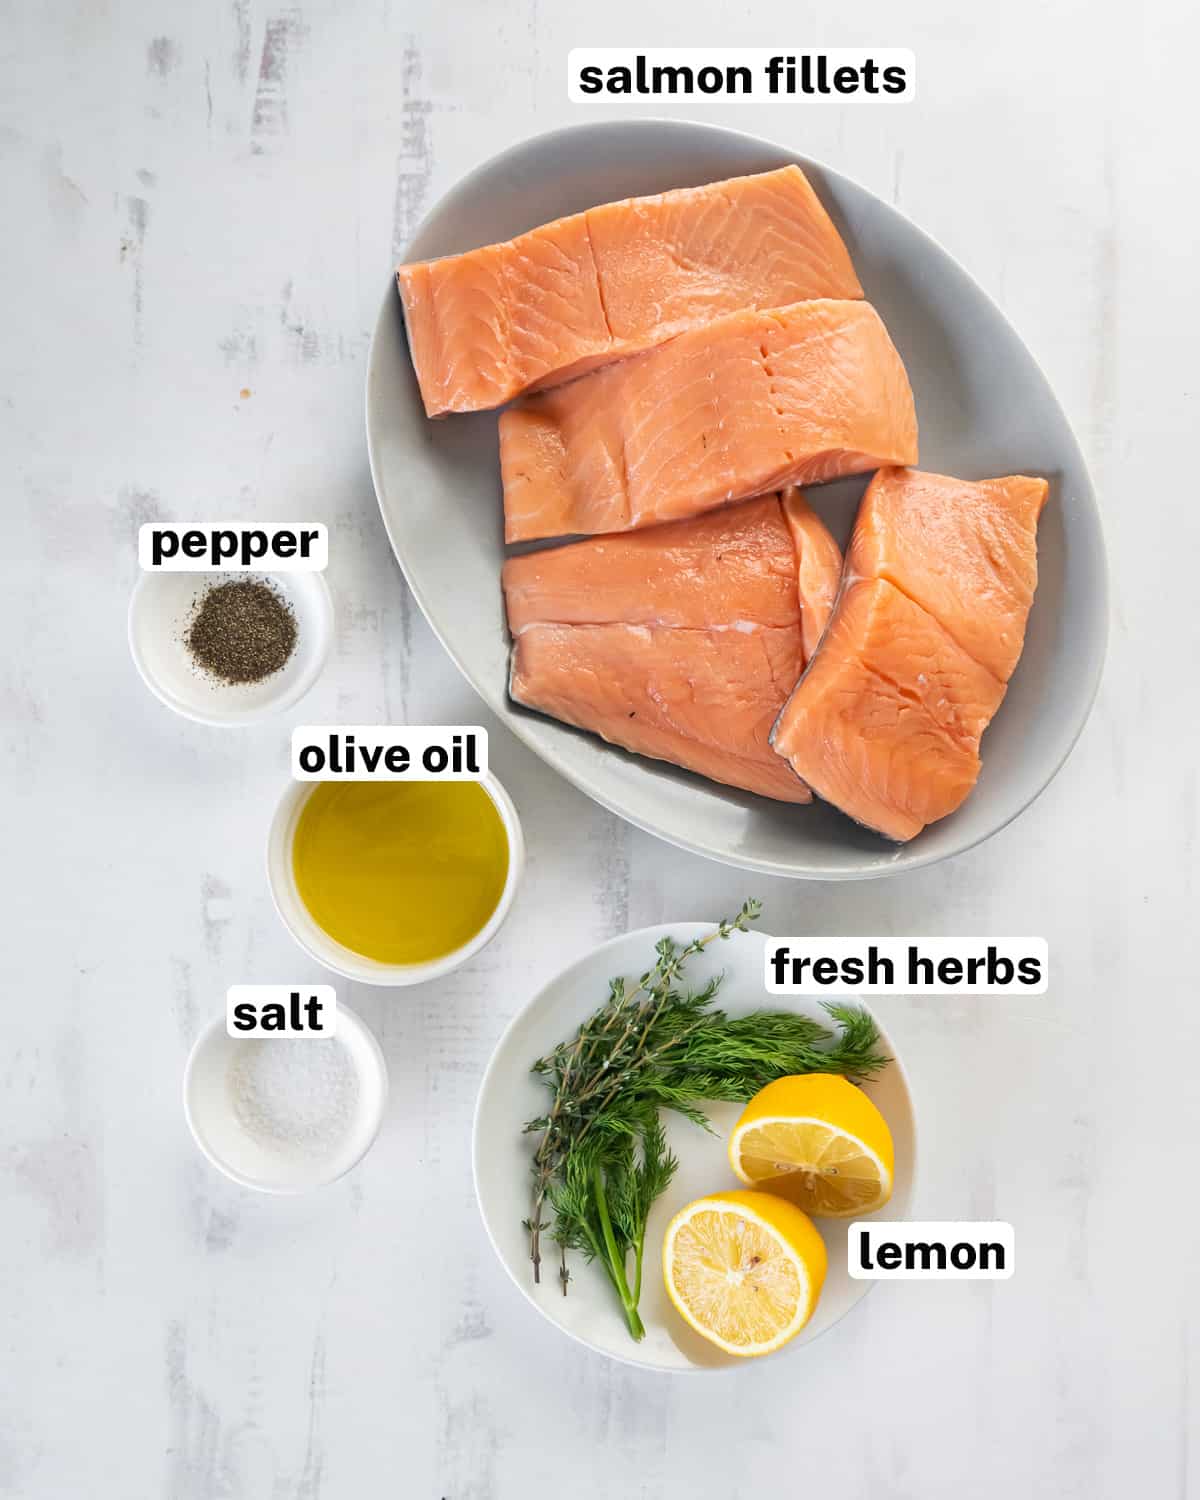 Salmon fillets and other ingredients with text overlay.